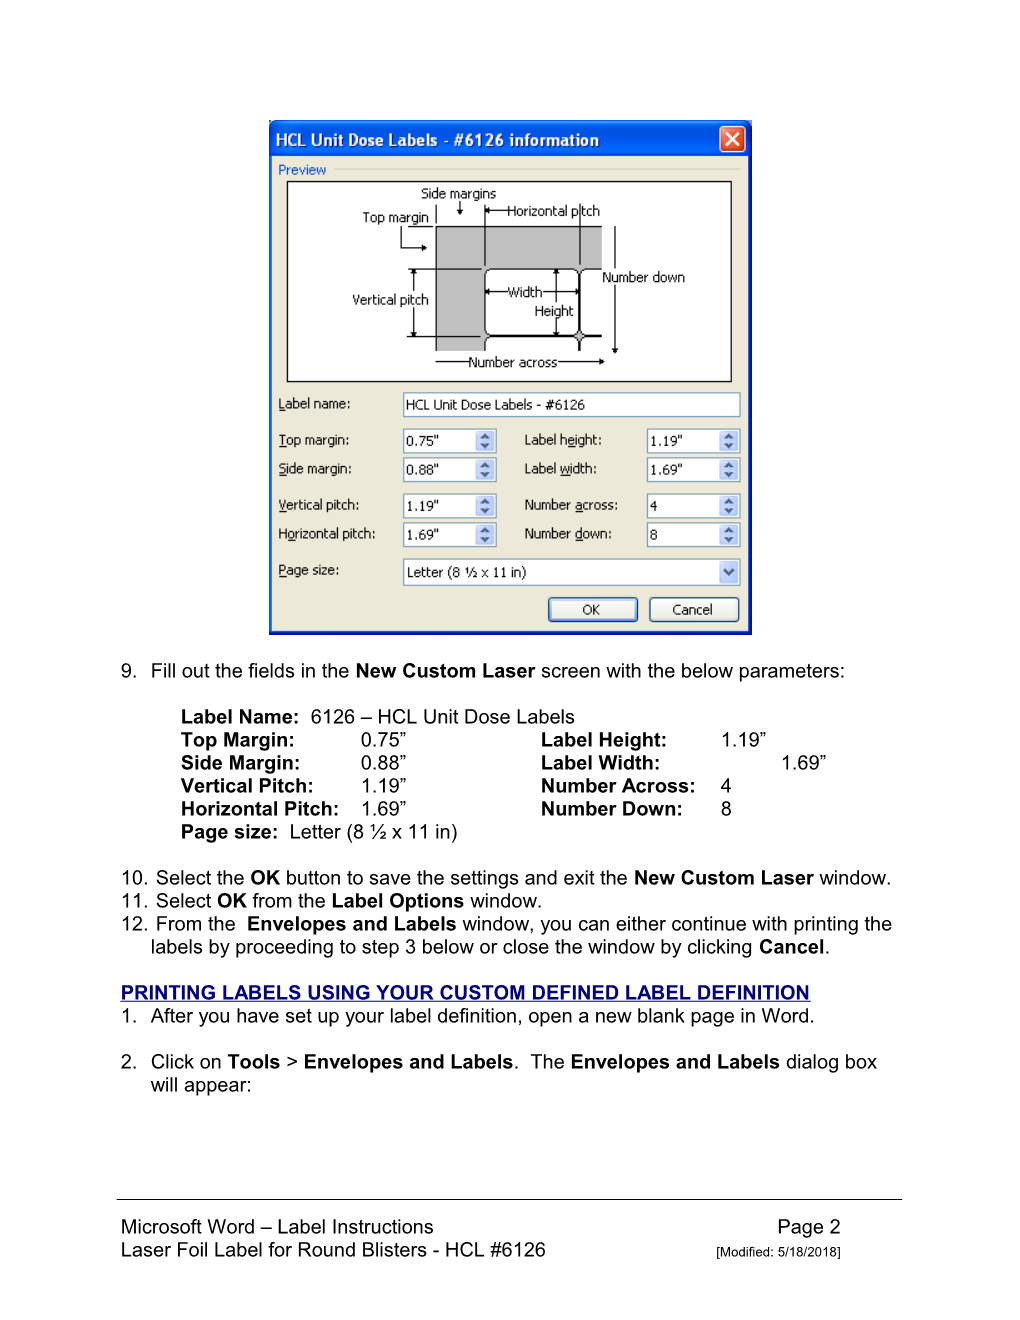 Microsoftword Labels Instructions